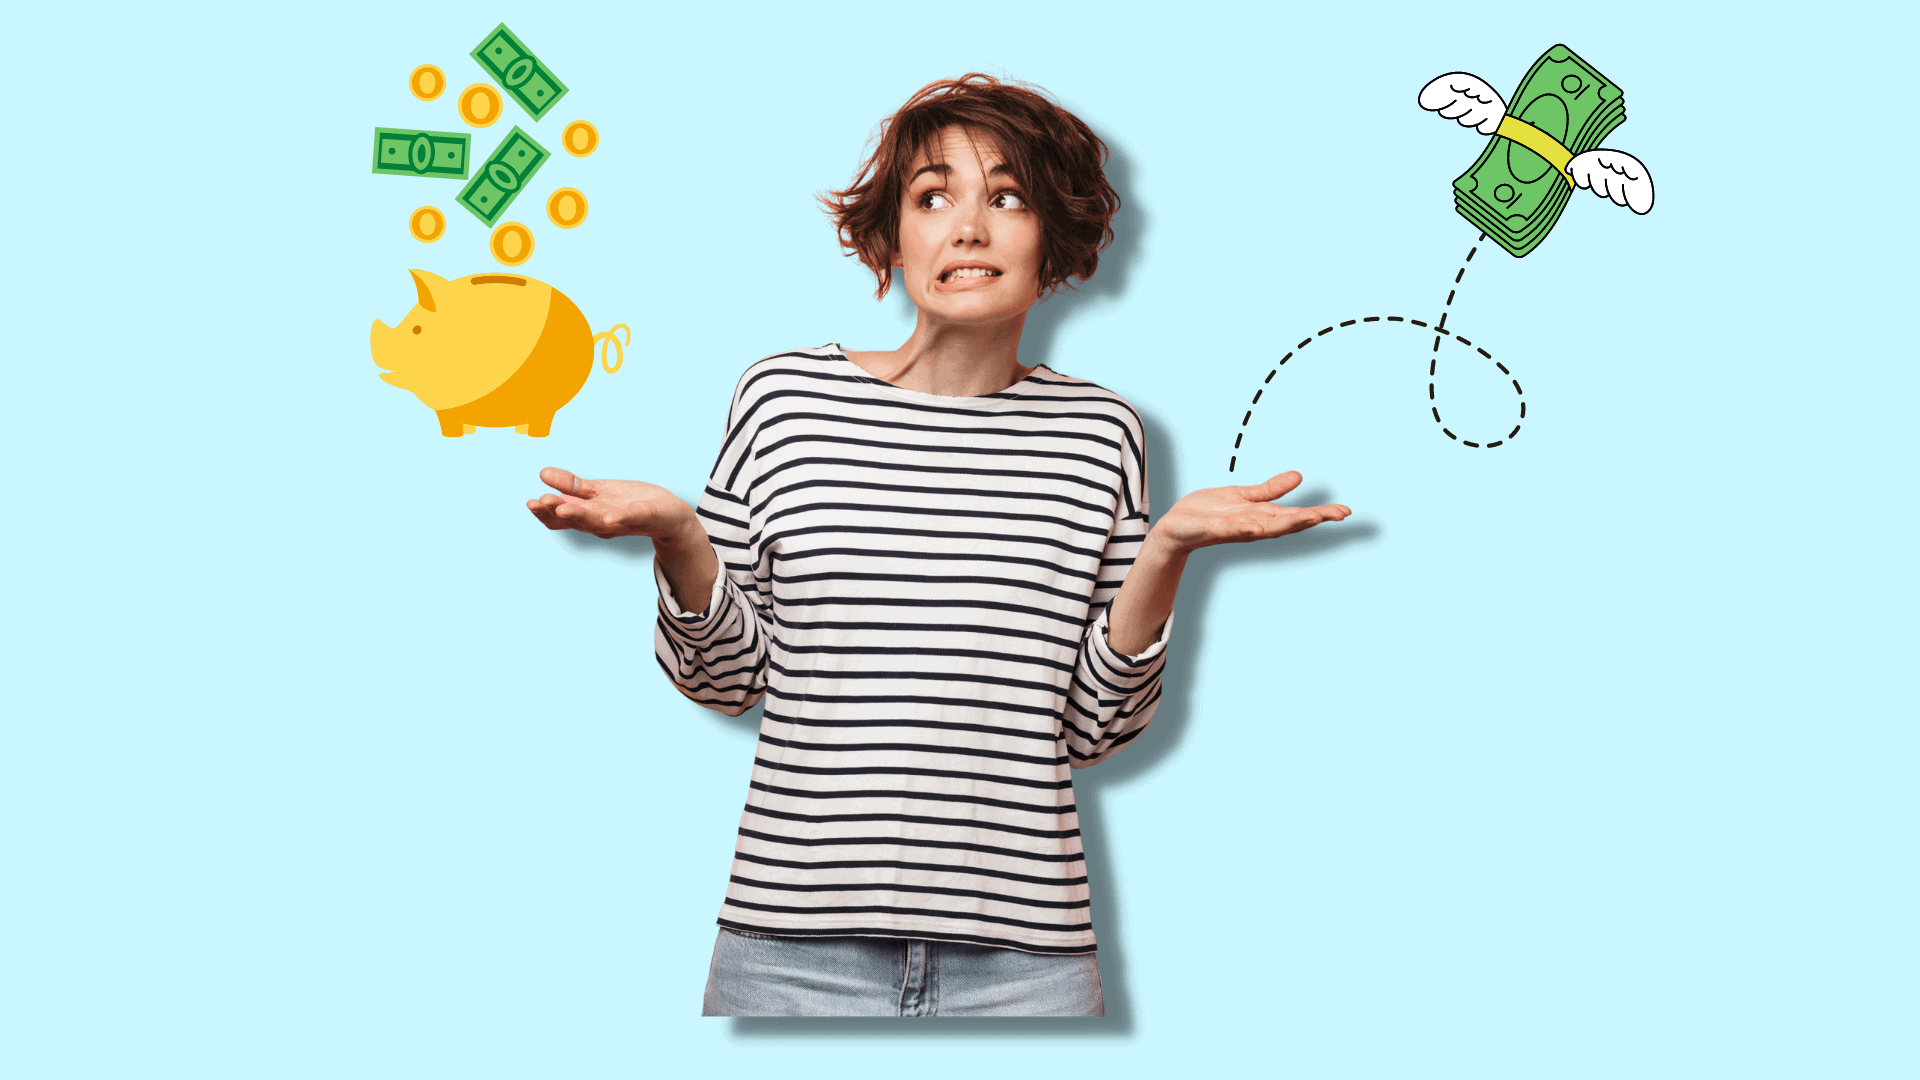 graphic of confused woman holding out hands with money flying out of one and a piggy bank with savings in the other light blue background